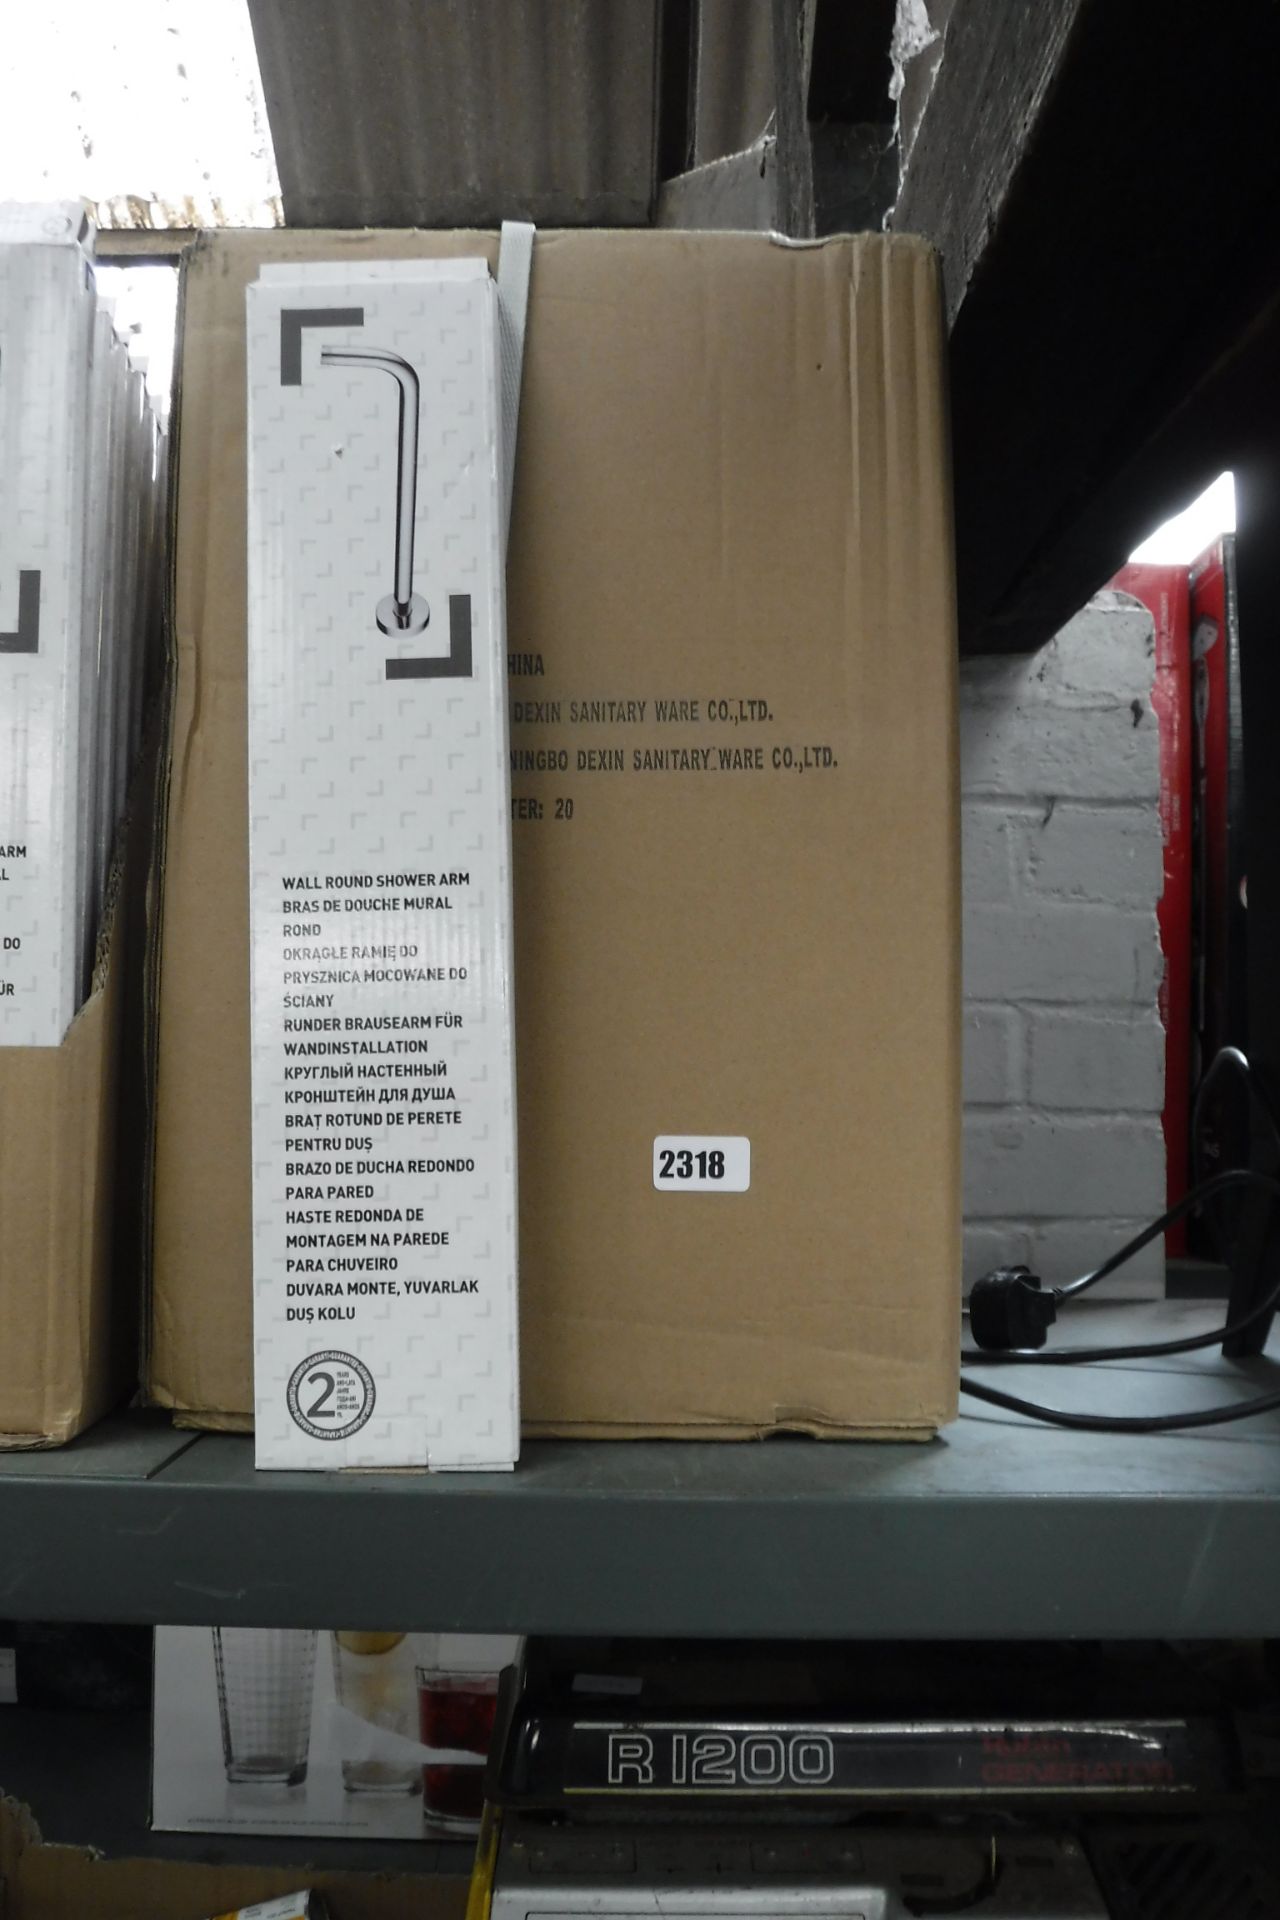 2311 2 boxes containing 40 wall-round shower arms